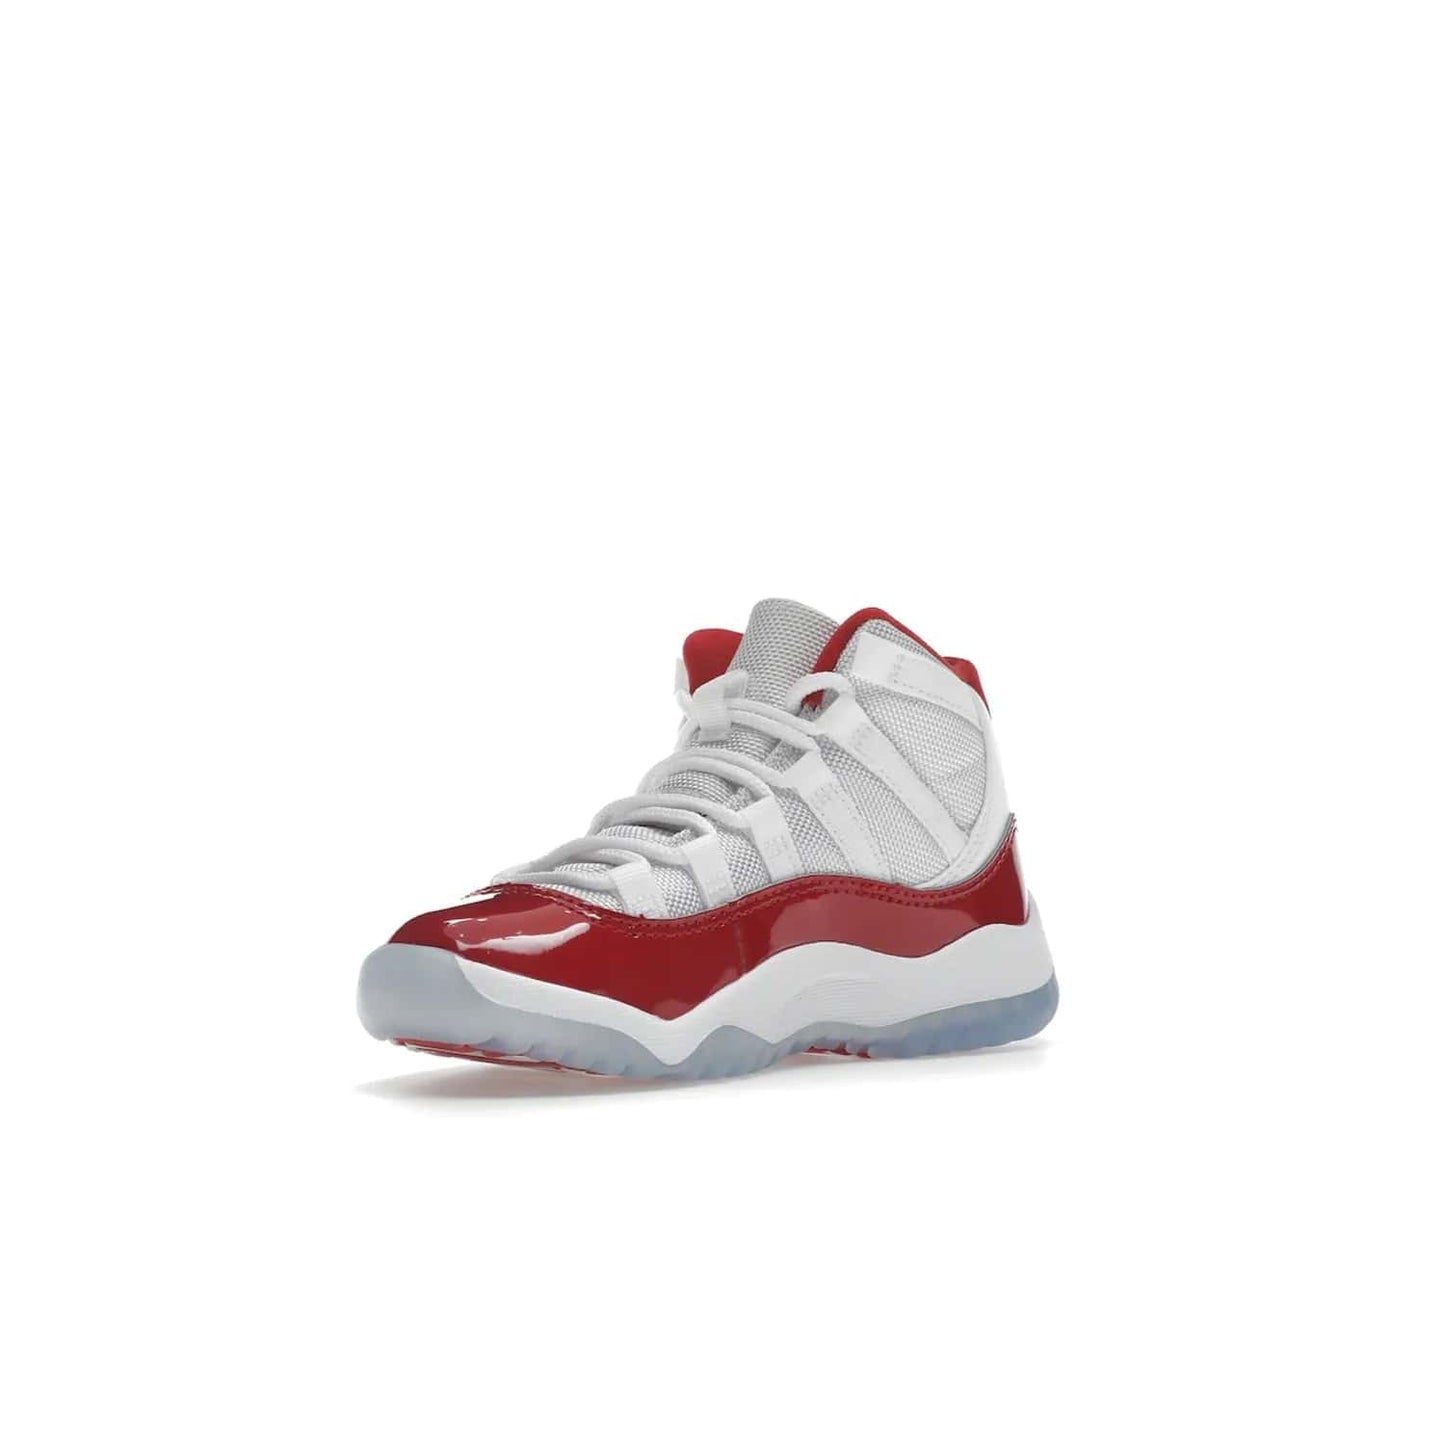 Jordan 11 Retro Cherry (2022) (PS) - Image 15 - Only at www.BallersClubKickz.com - An iconic silhouette with a timeless look, the Air Jordan 11 Retro Cherry 2022 PS features a crisp White, Varsity Red and Black colorway. The upper is made of ballistic mesh, a red patent leather mudguard, '23' branding and white Phylon midsole. Get optimal cushioning and comfort on December 10th, 2022. Don't miss out.